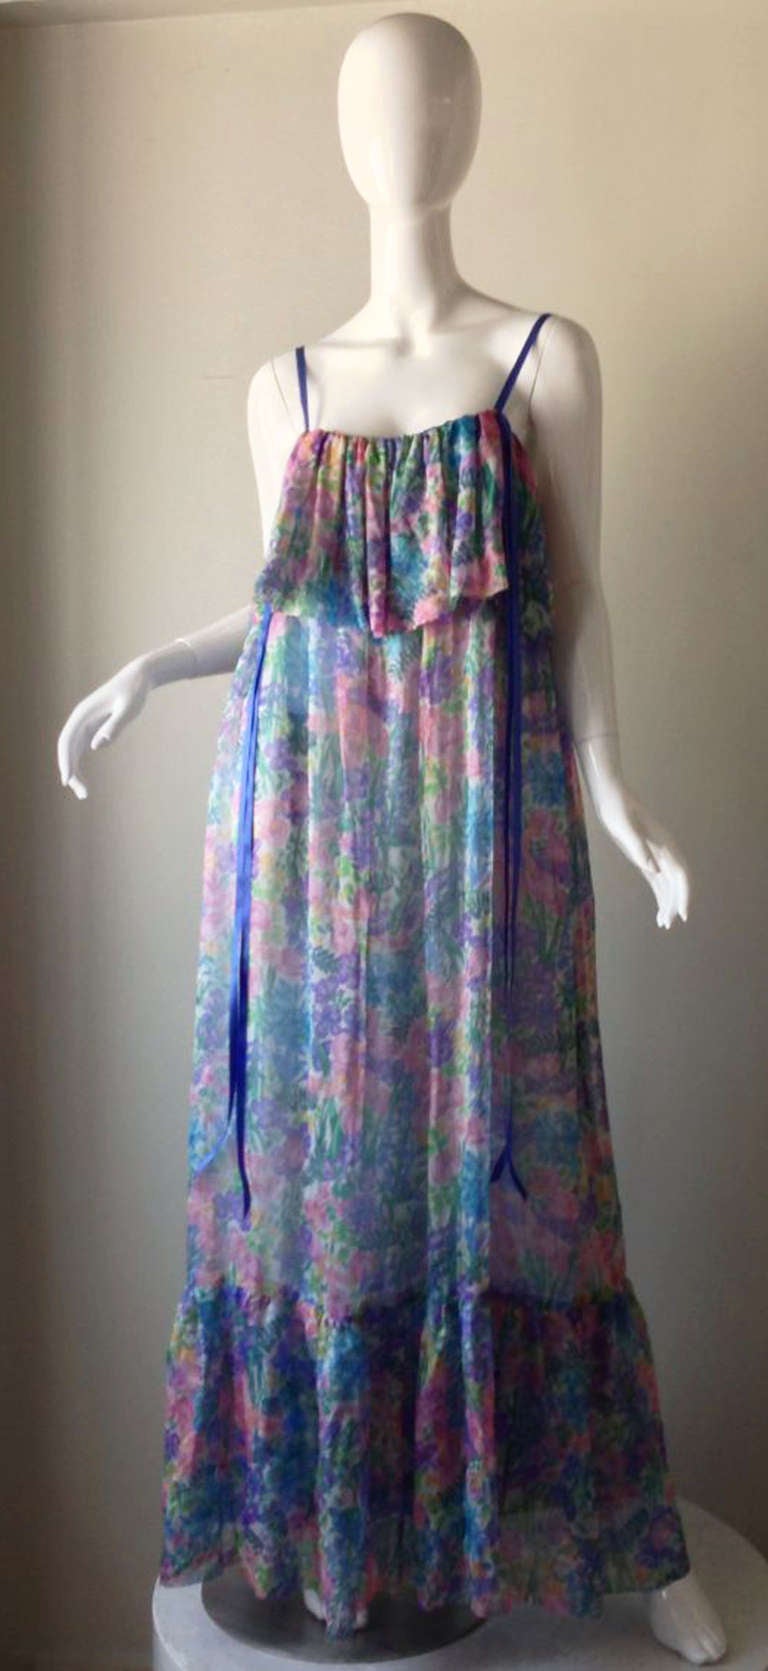 A fine and rare vintage Christian Dior gown. Ethereal floral silk print fabric item features a pleated bodice panel with a matching effect hem. Silk ribbon shoulder straps and matching long ties front and back. Item slips over head (no zipper).